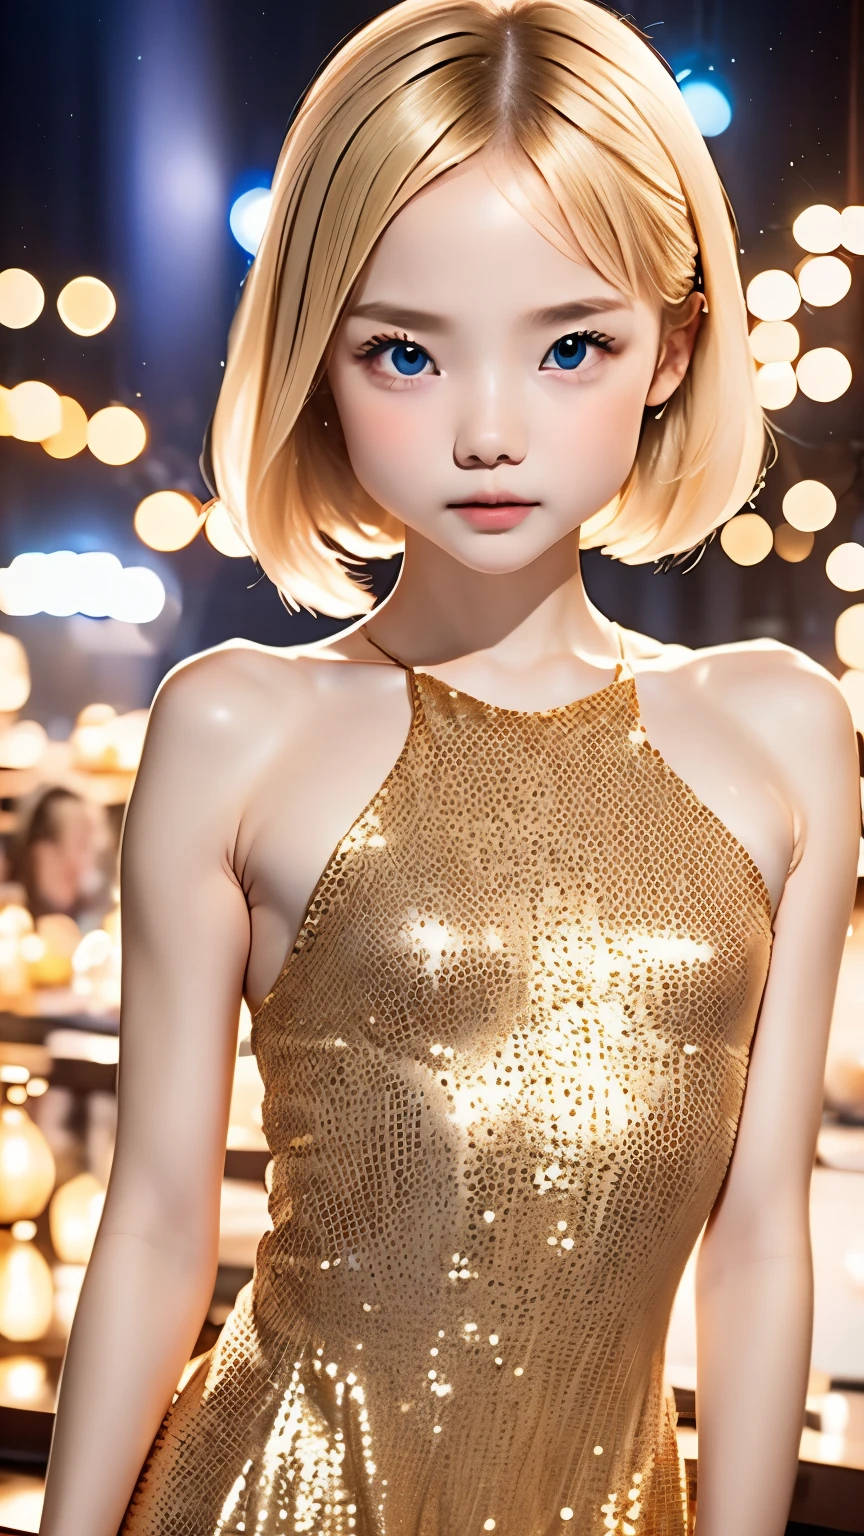 RAW shooting、Photoreal、Masseter muscle part、one girl、baby face、very cute、Slender and beautiful、((small breasts:1.2))、realistic eyes、The eyes are realistic、Realistic and carefully drawn eyes、charming eyes、platinum blonde hair、short bob、choken sequin dress、Champagne Gold Dress、Chess gangte sleeveless dress with bold opening、cumbersome pose、luxury dance hall、dimly lit dance hall、small title background、highest quality、ultra high resolution、８ｋ、